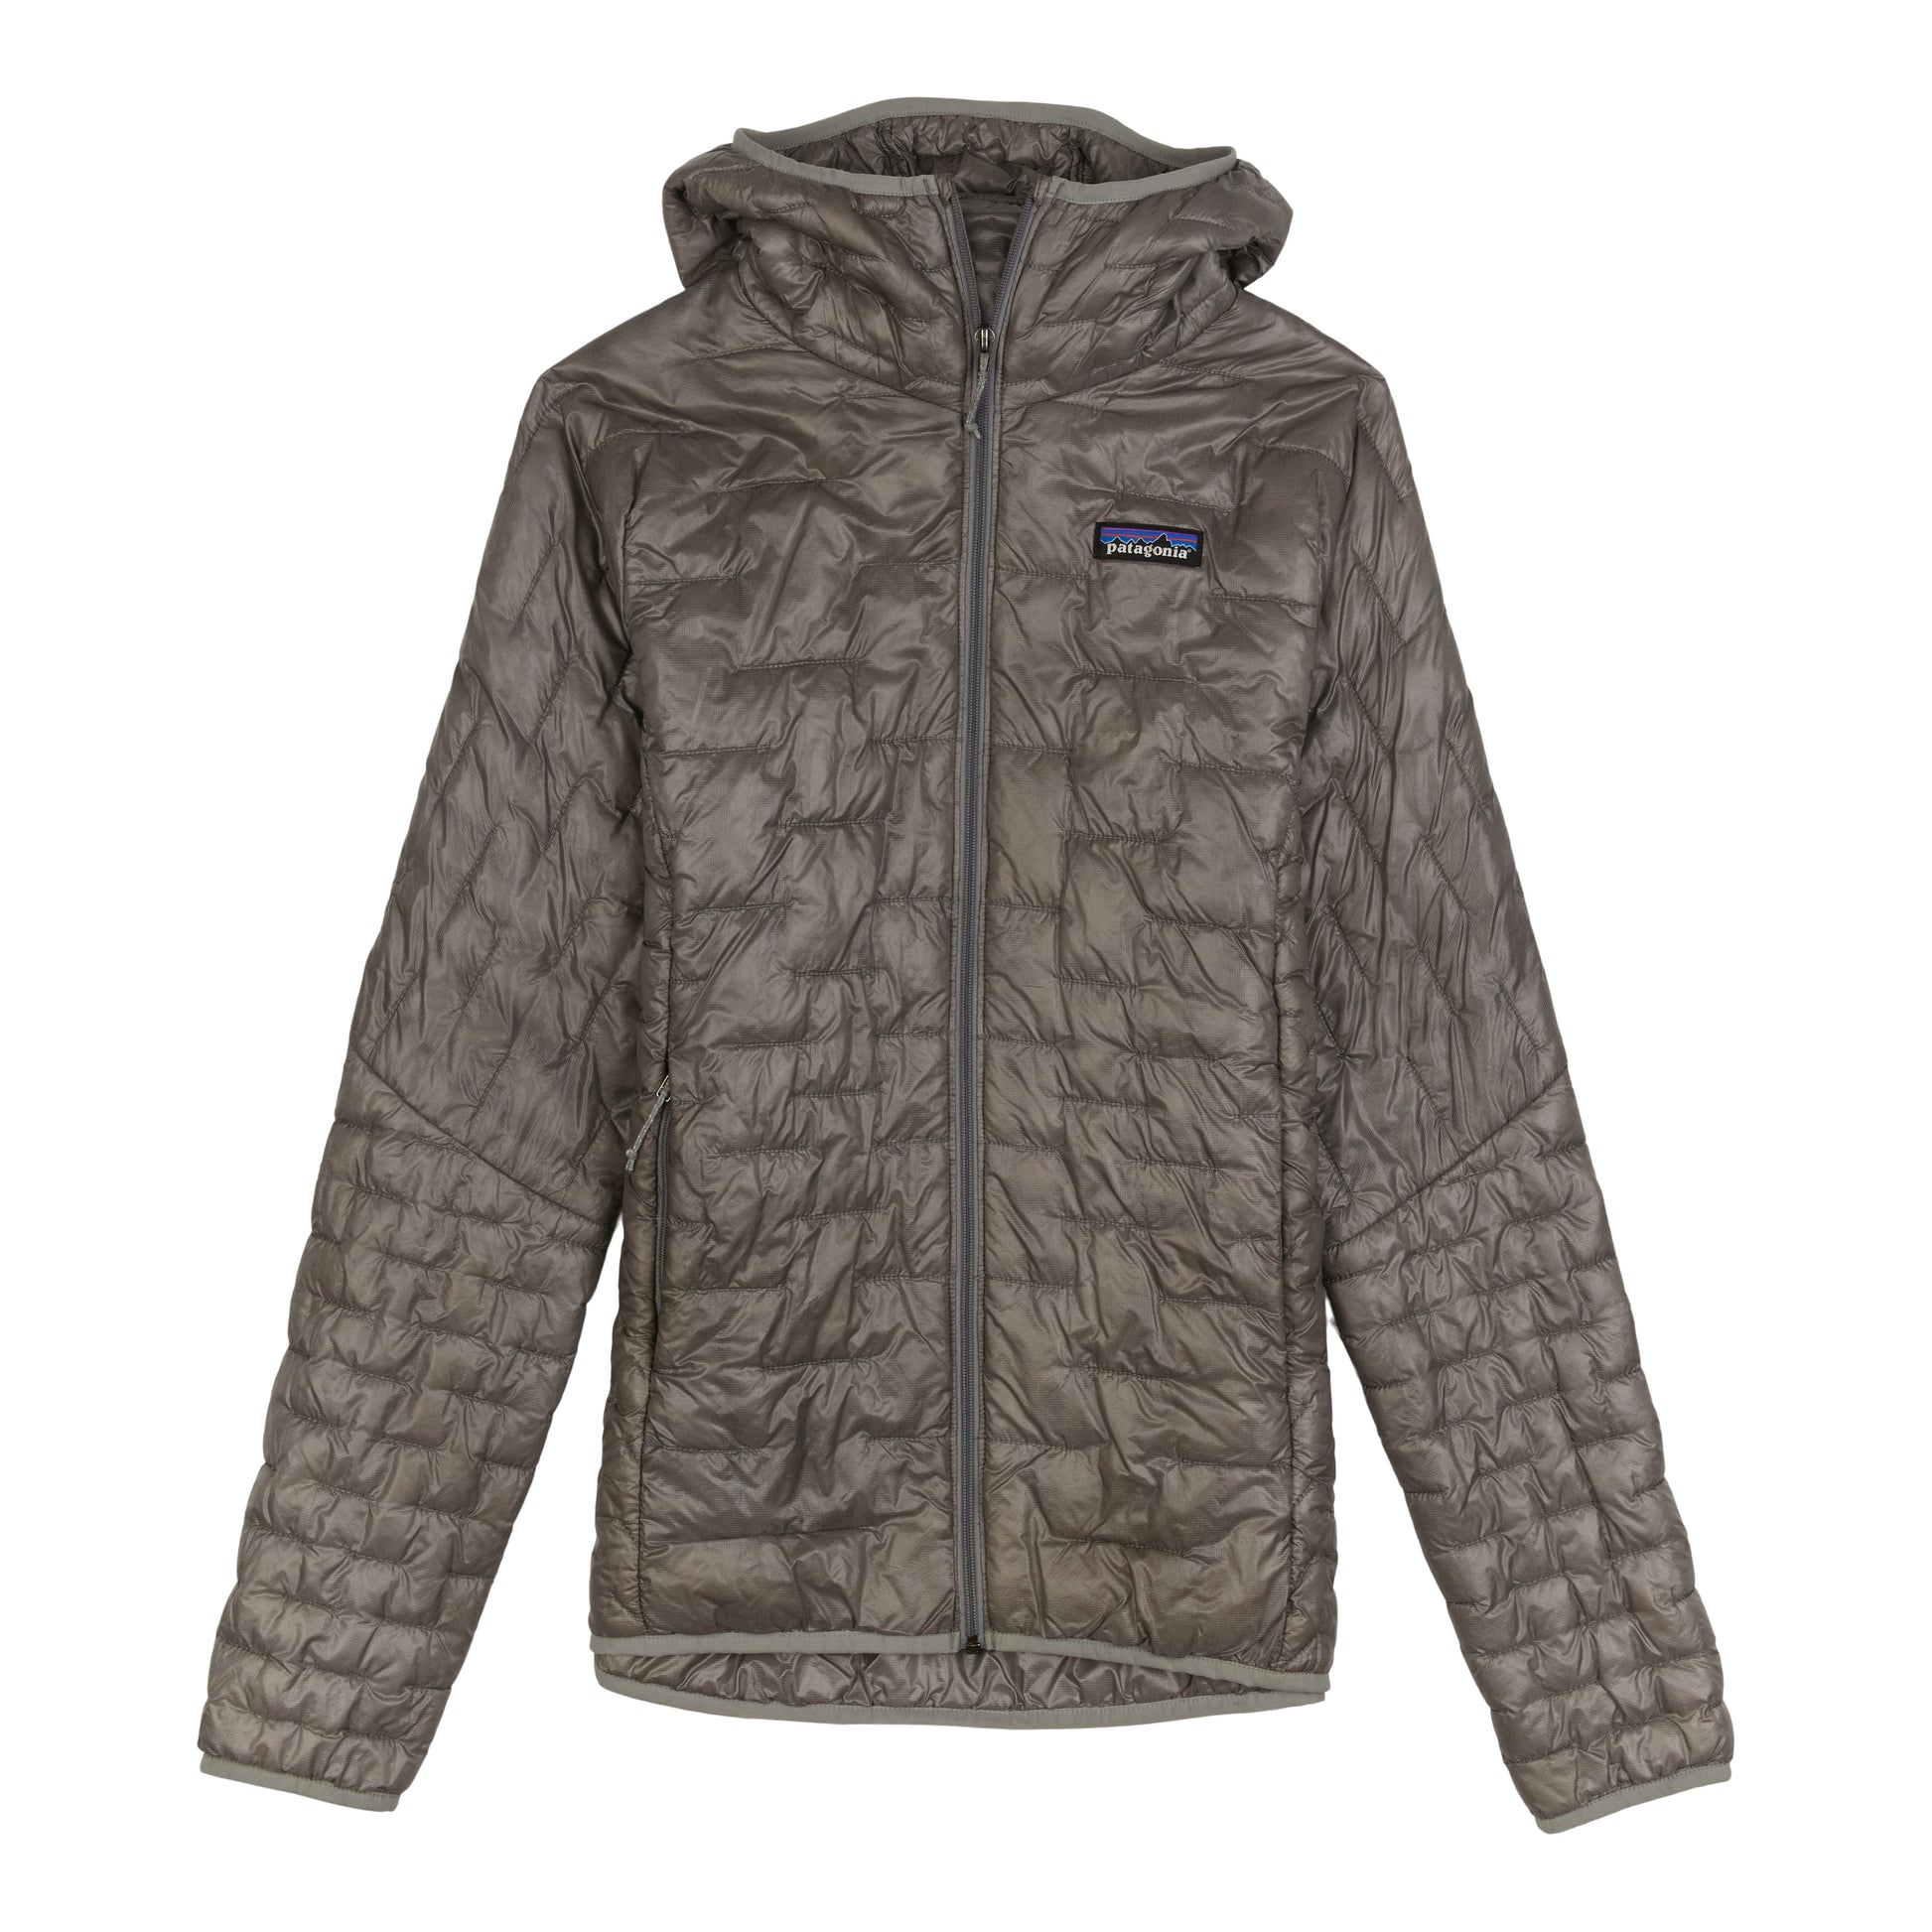 Patagonia Nano Puff Hooded Insulated Jacket - Women's - Clothing